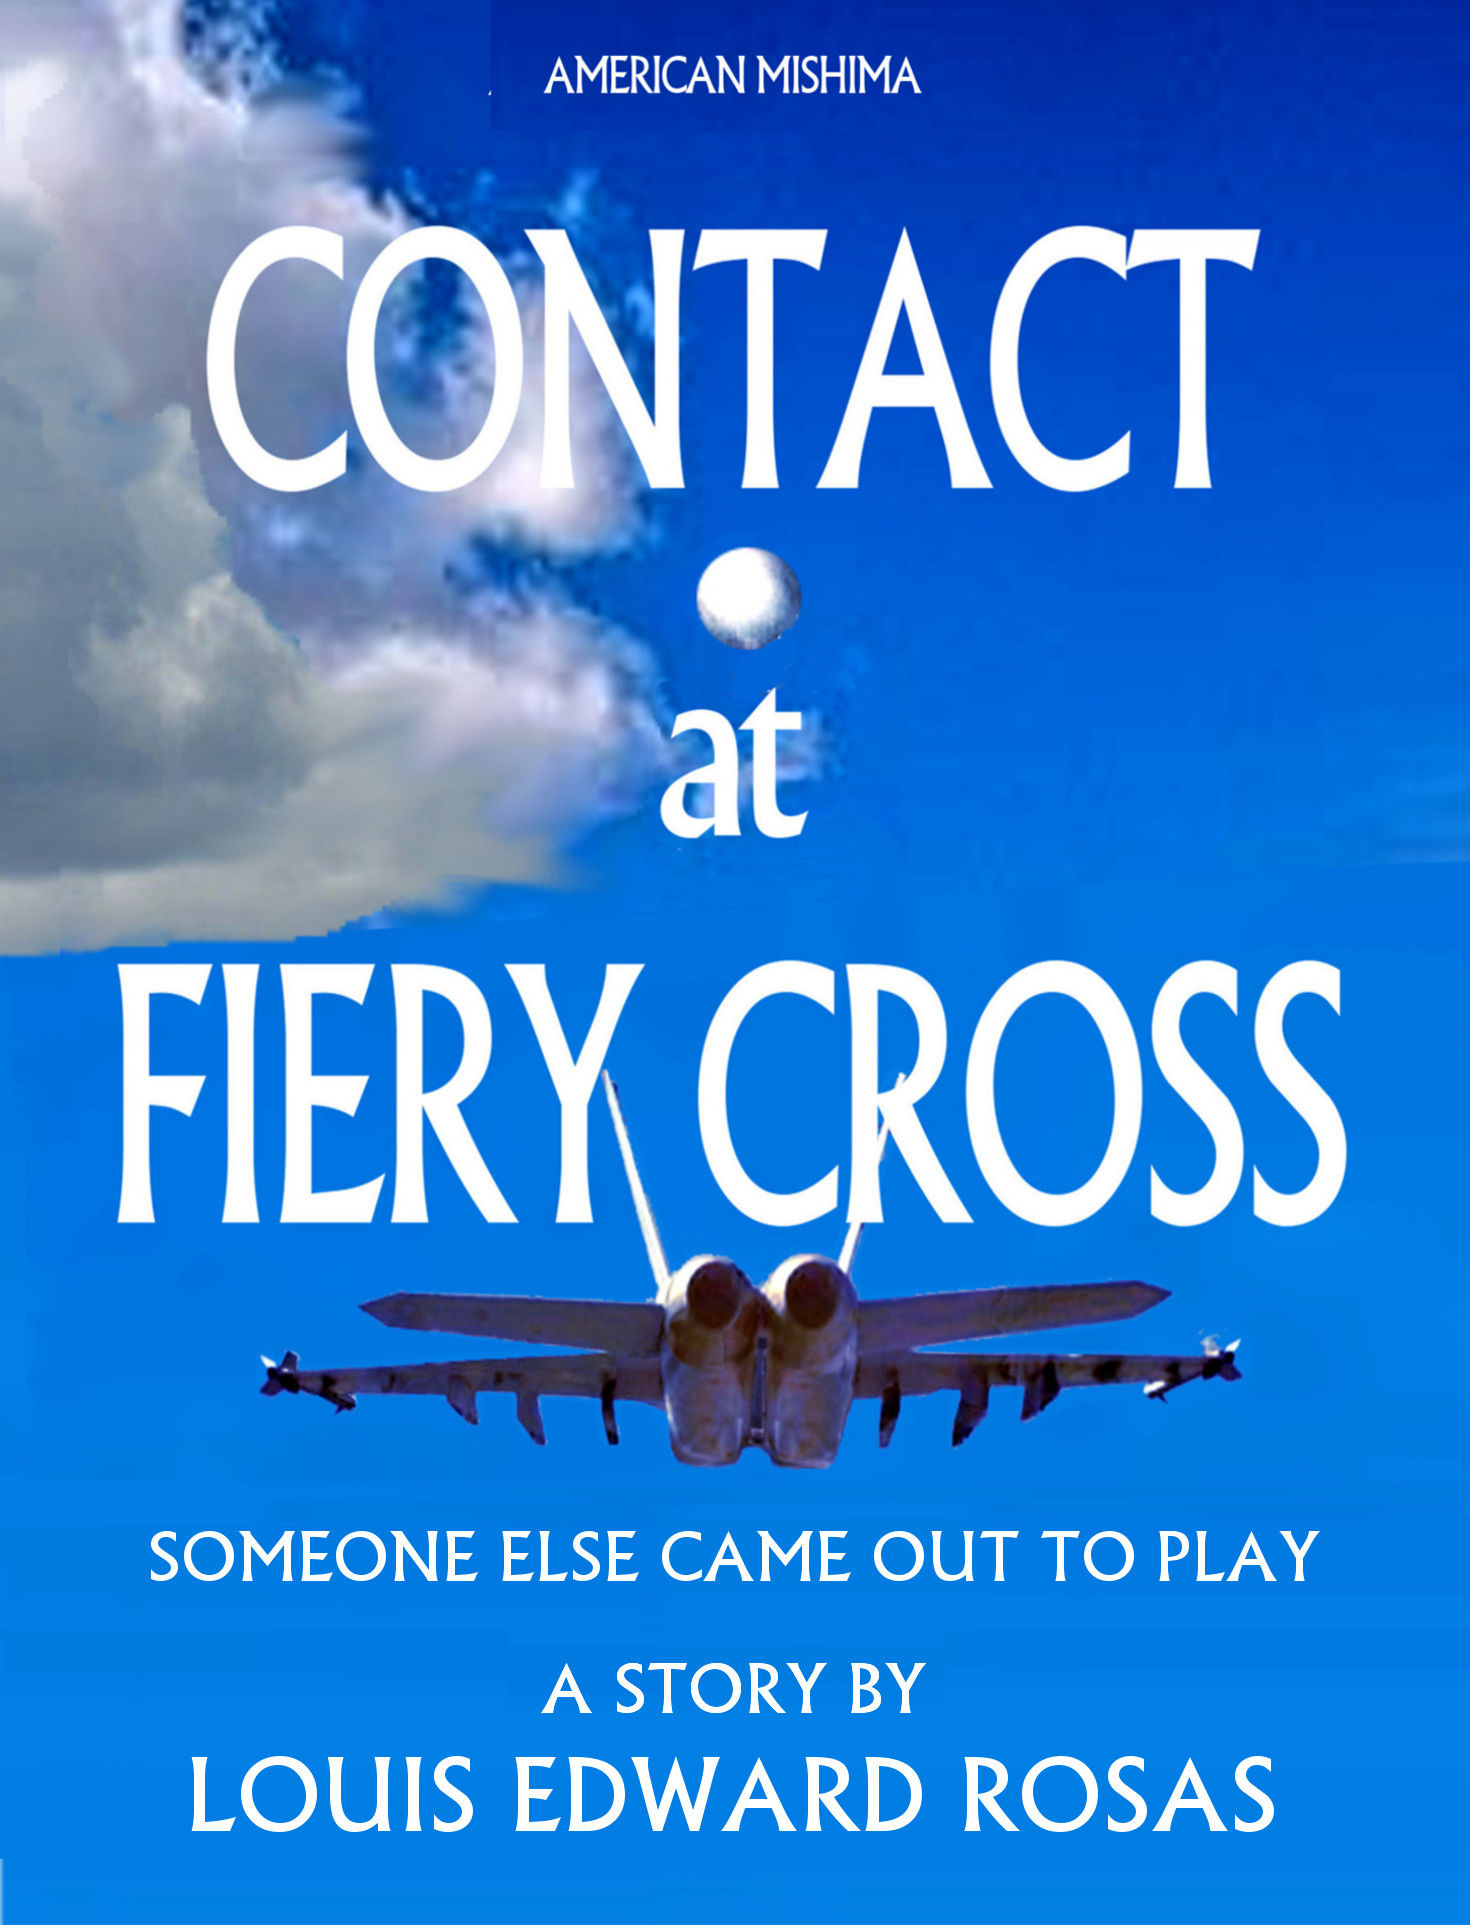 CONTACT AT FIERY CROSS